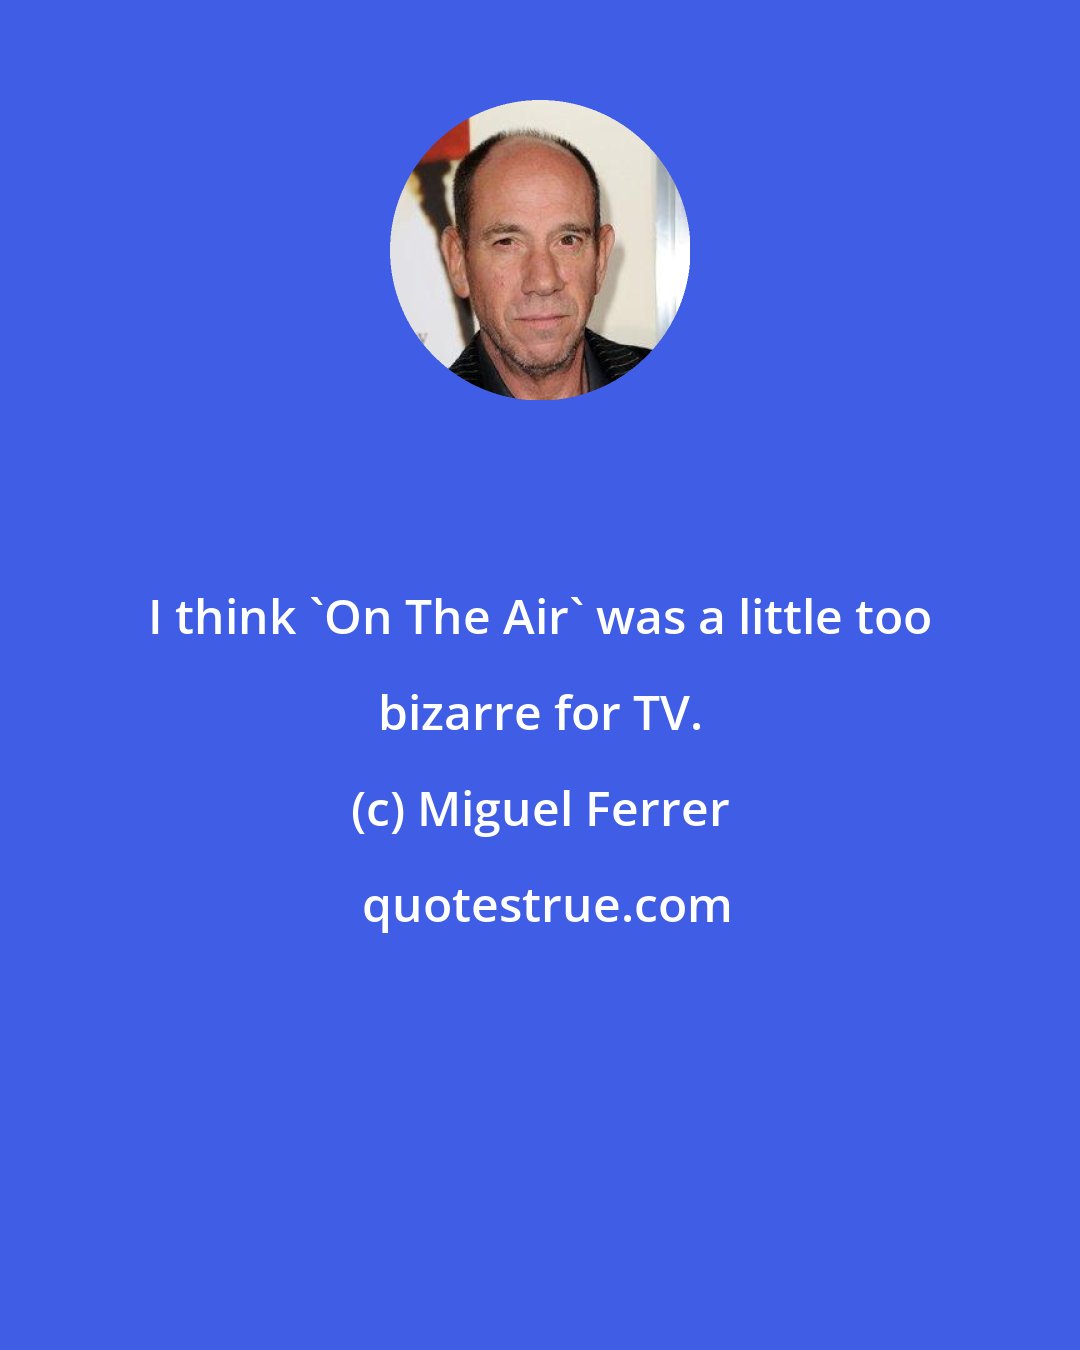 Miguel Ferrer: I think 'On The Air' was a little too bizarre for TV.